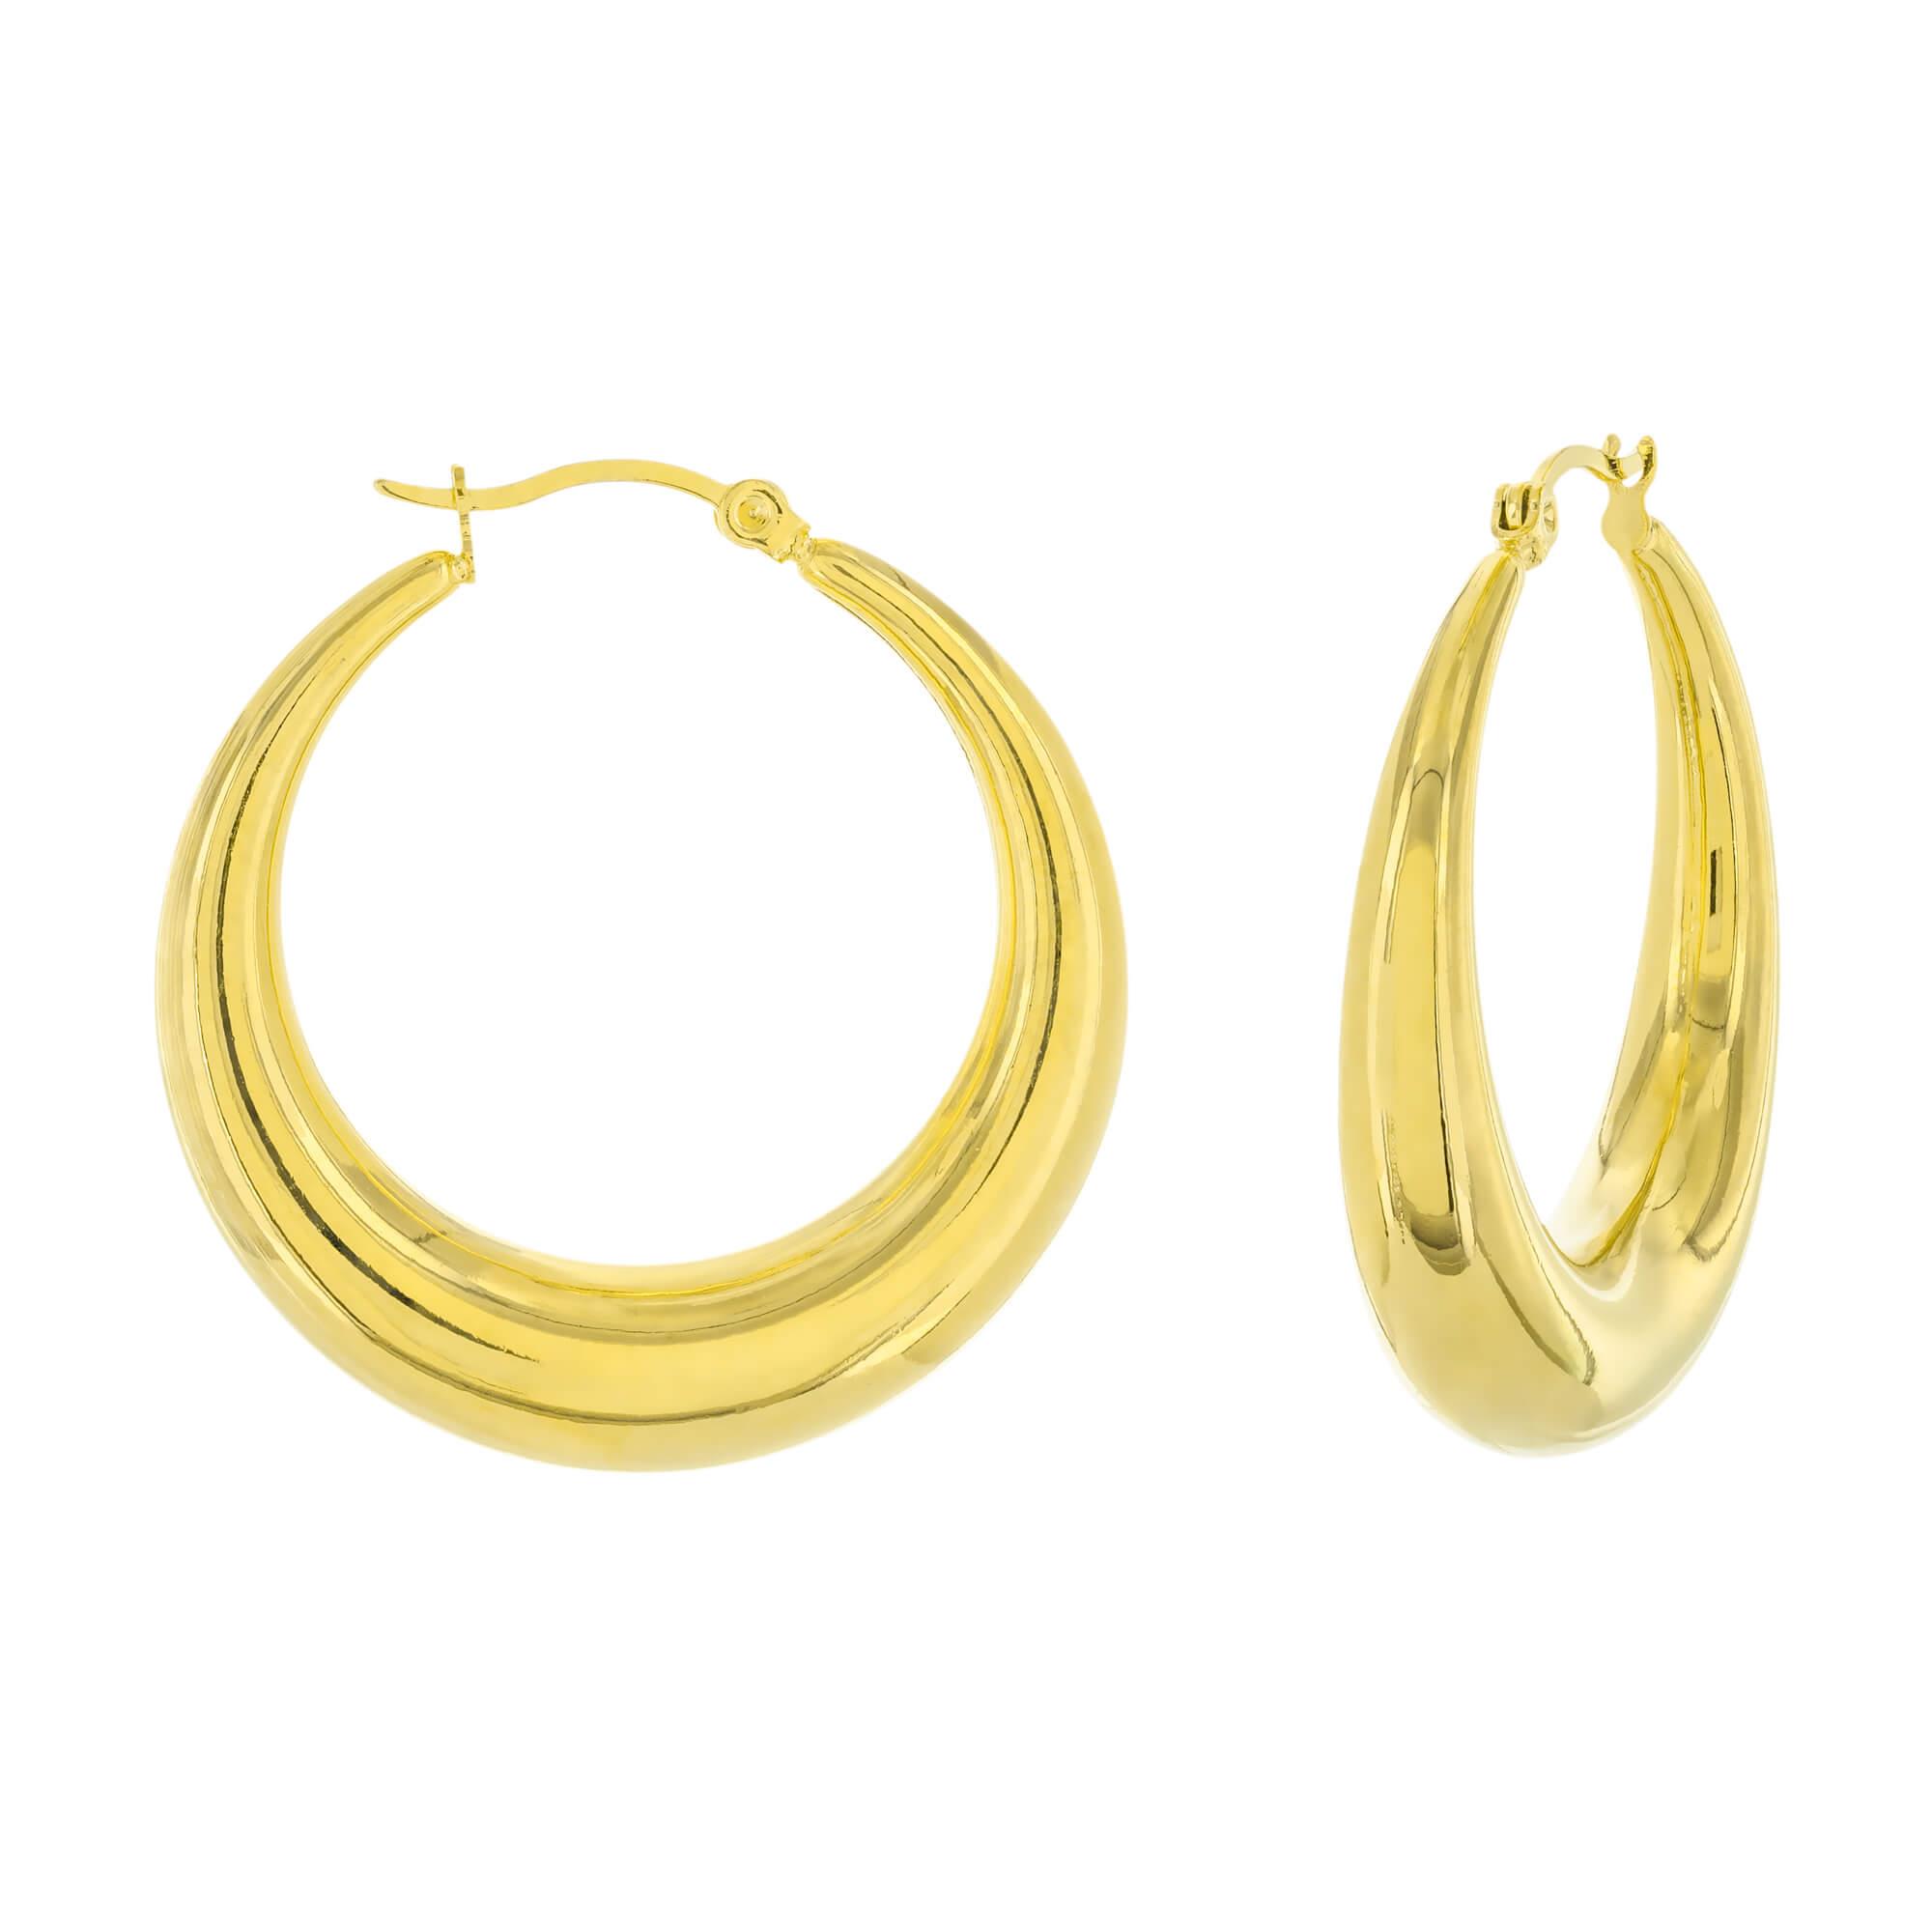 STAINLESS STEEL HOOP GOLD PLATED EARRING